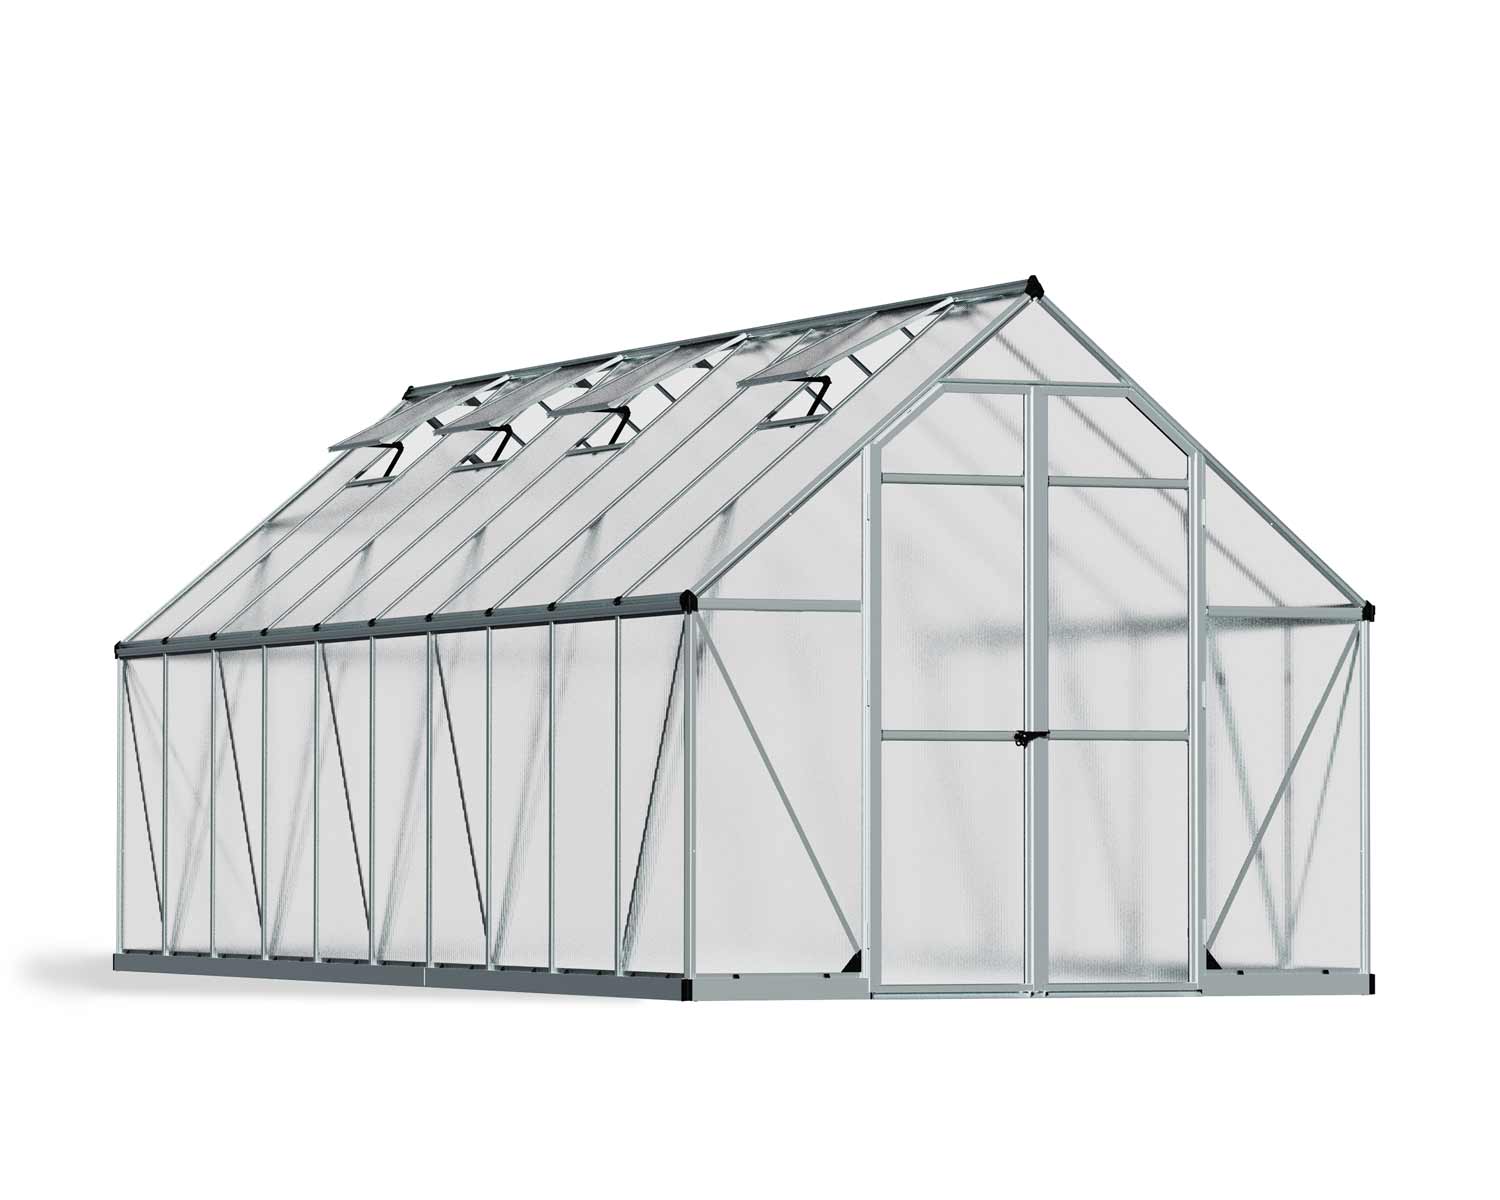 Palram Canopia Essence 8 ft. x 20 ft. Greenhouse Kit - Silver Structure & Twin Wall Panels